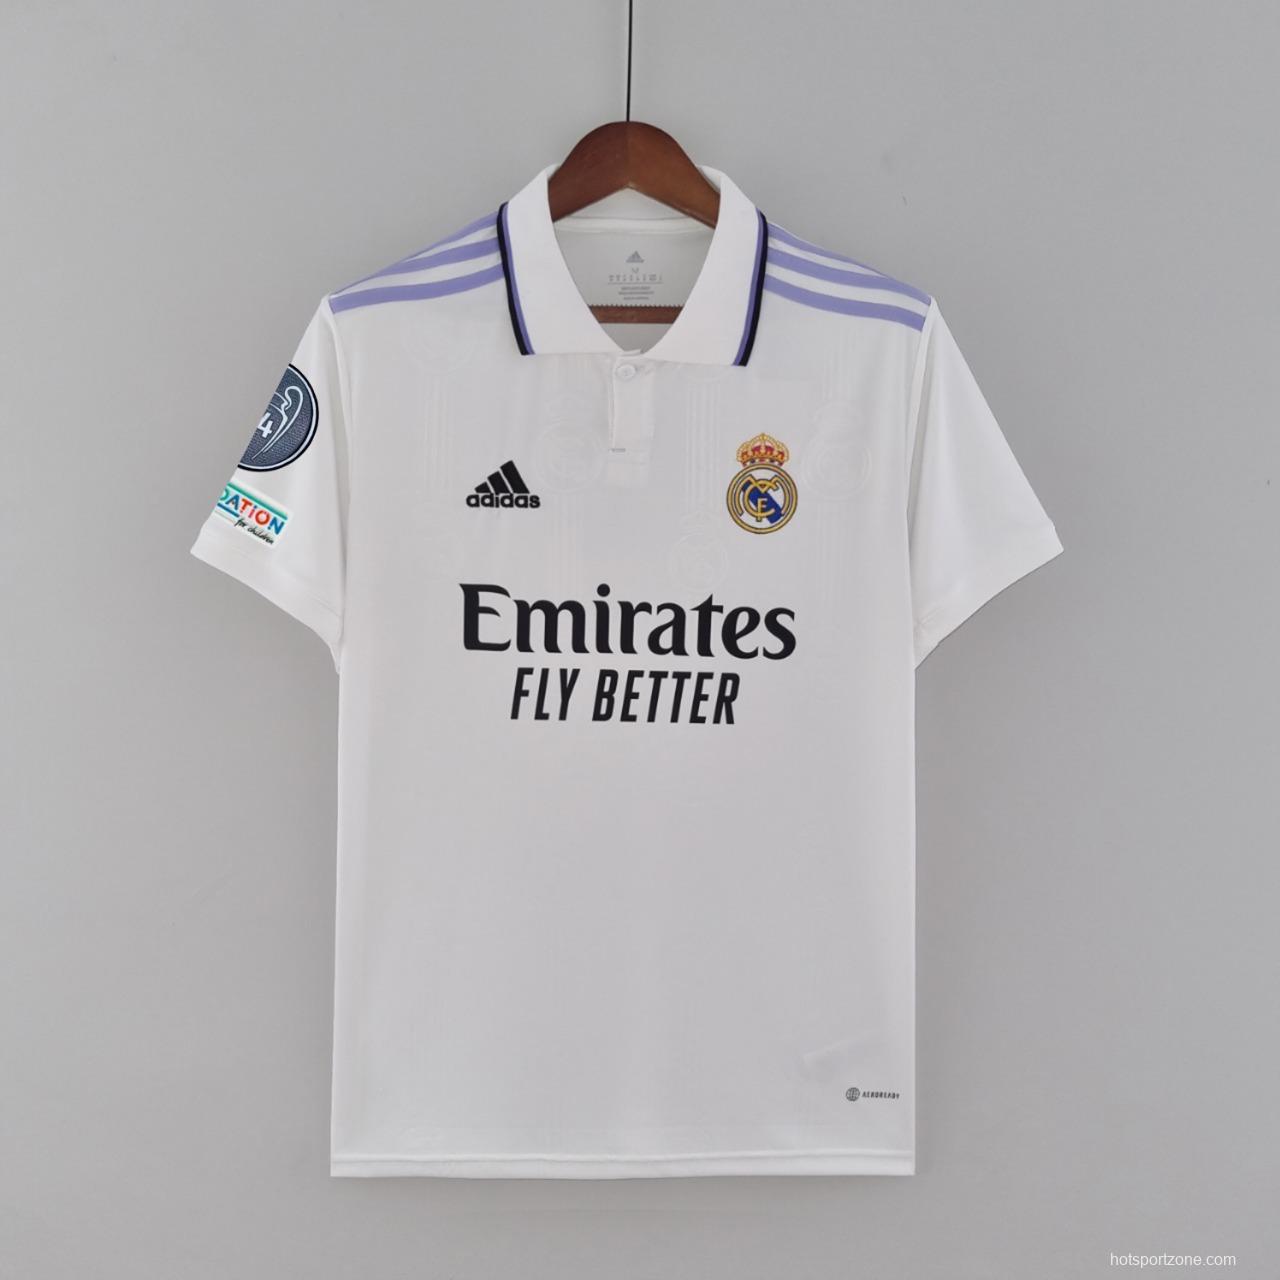 22/23 14 Champions Edition Real Madrid Home Soccer Jersey